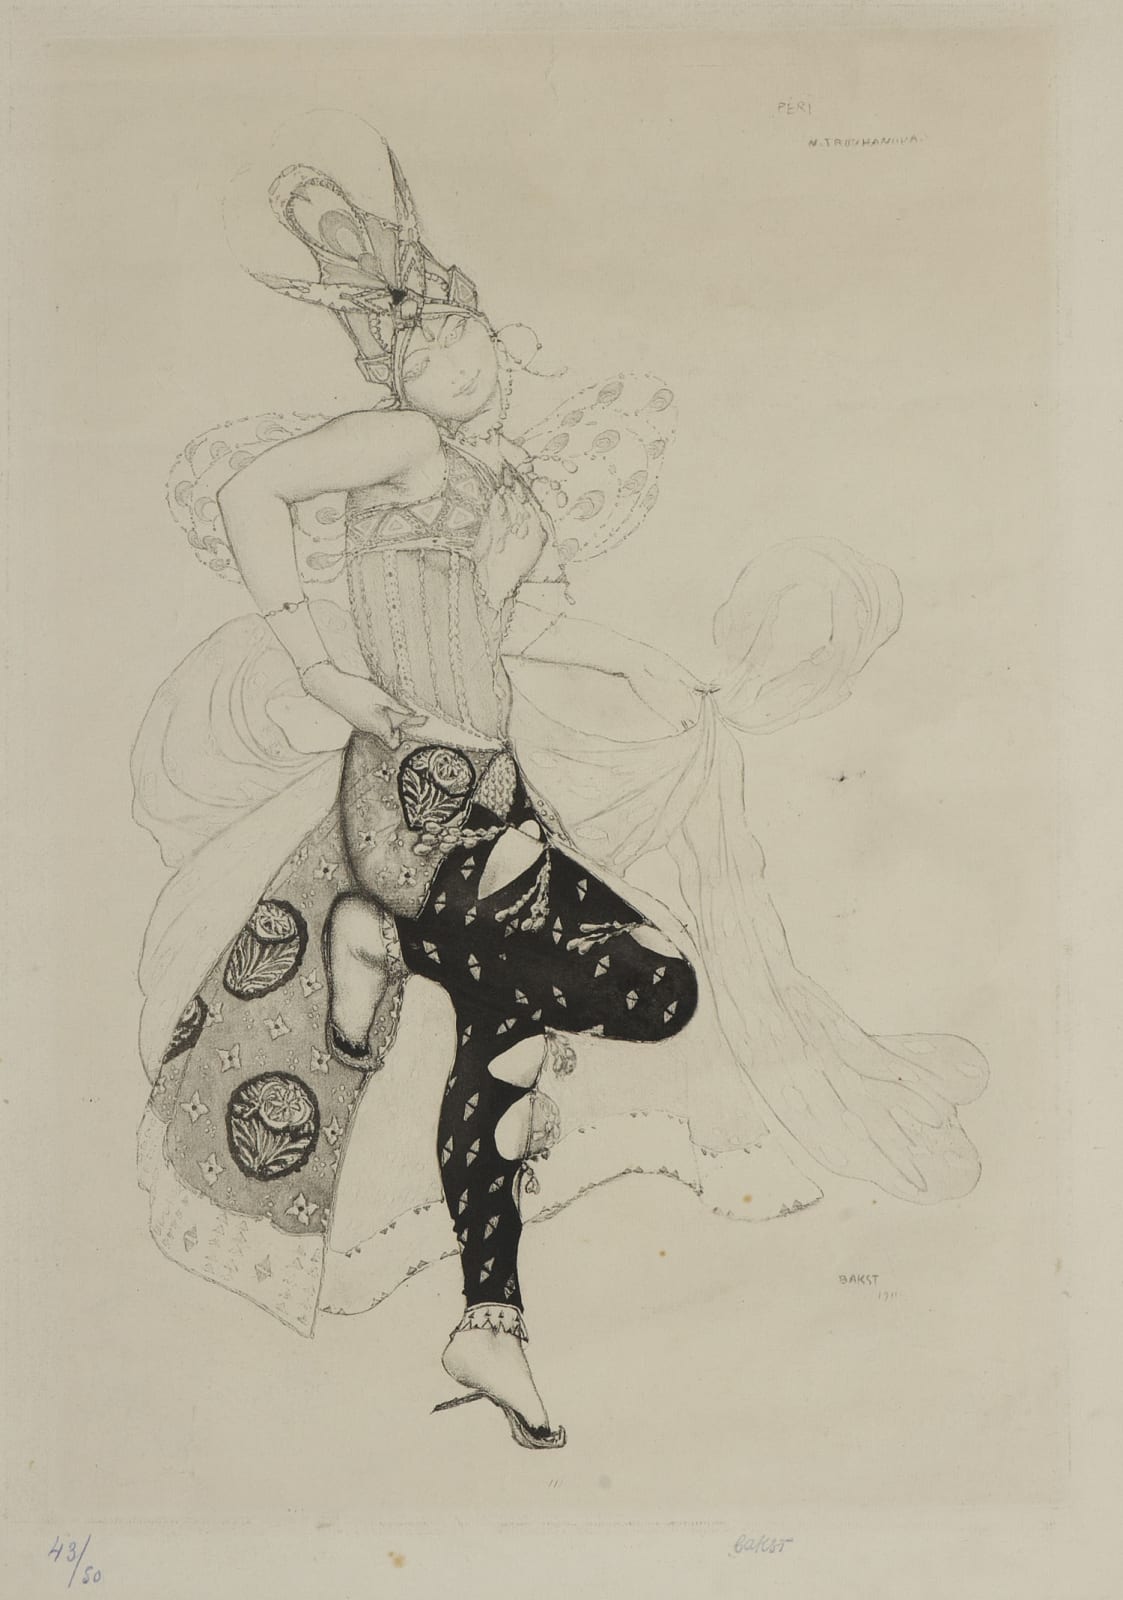 Léon Bakst (1866-1924) La Péri 1911 Lithograph on paper 55 x 38 cm Ben Uri Collection To see and discover more about this artist click here